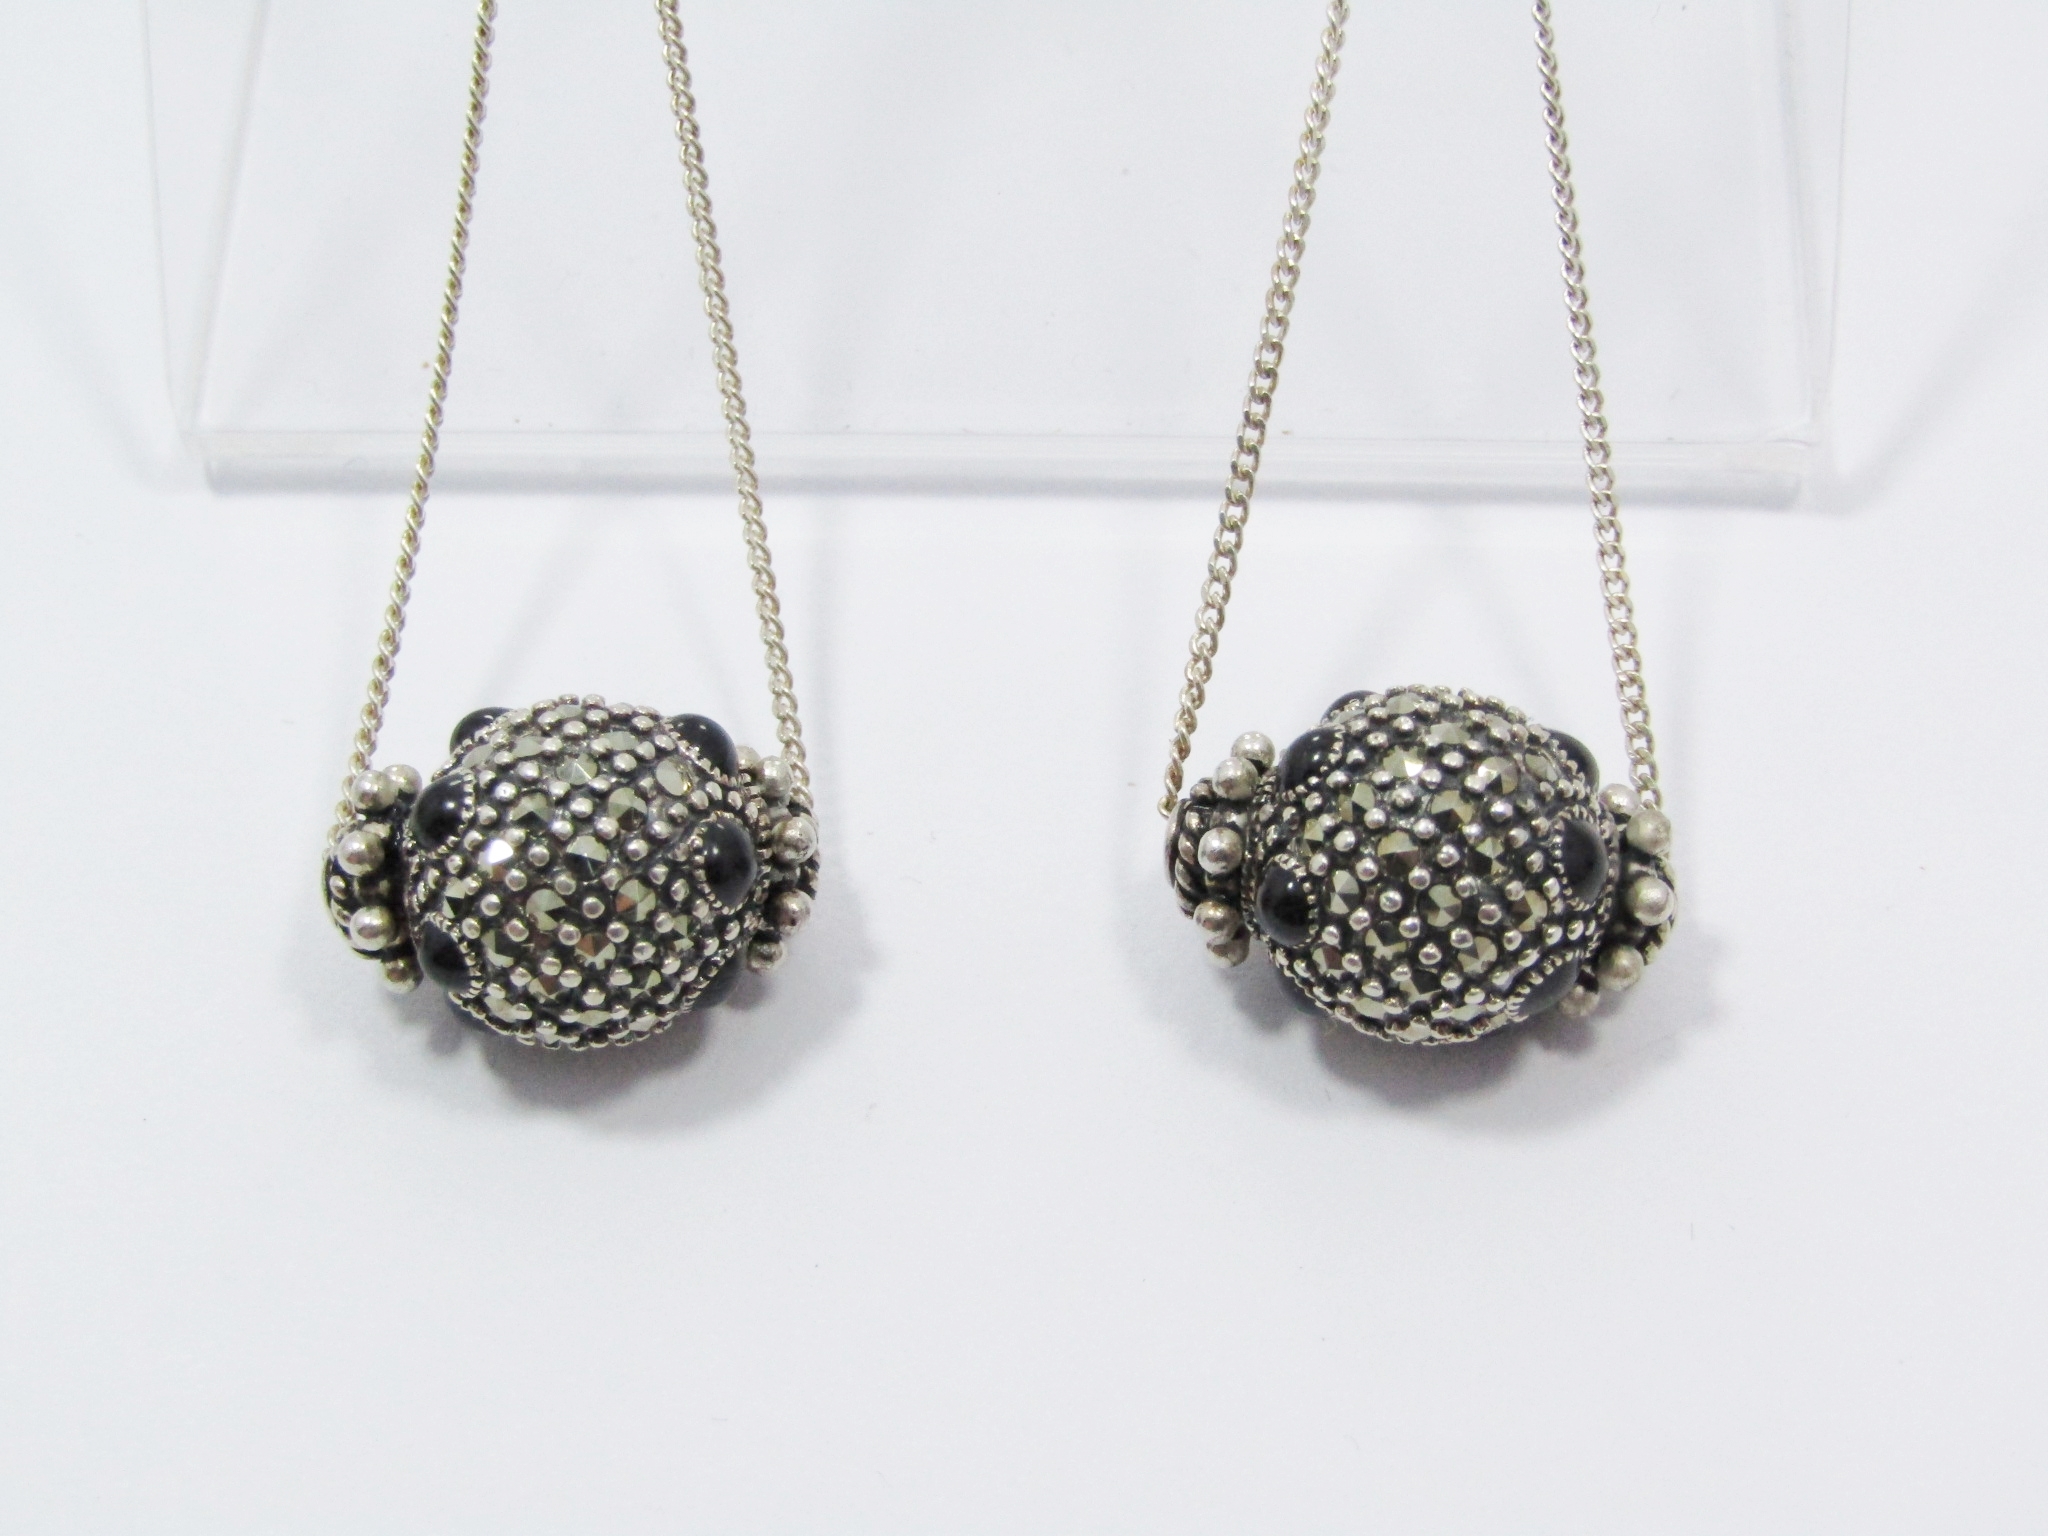 An Amazing Pair Of Dangling Ball Earrings Encrusted in Marcasite’s and Black Stones in Sterling Silver